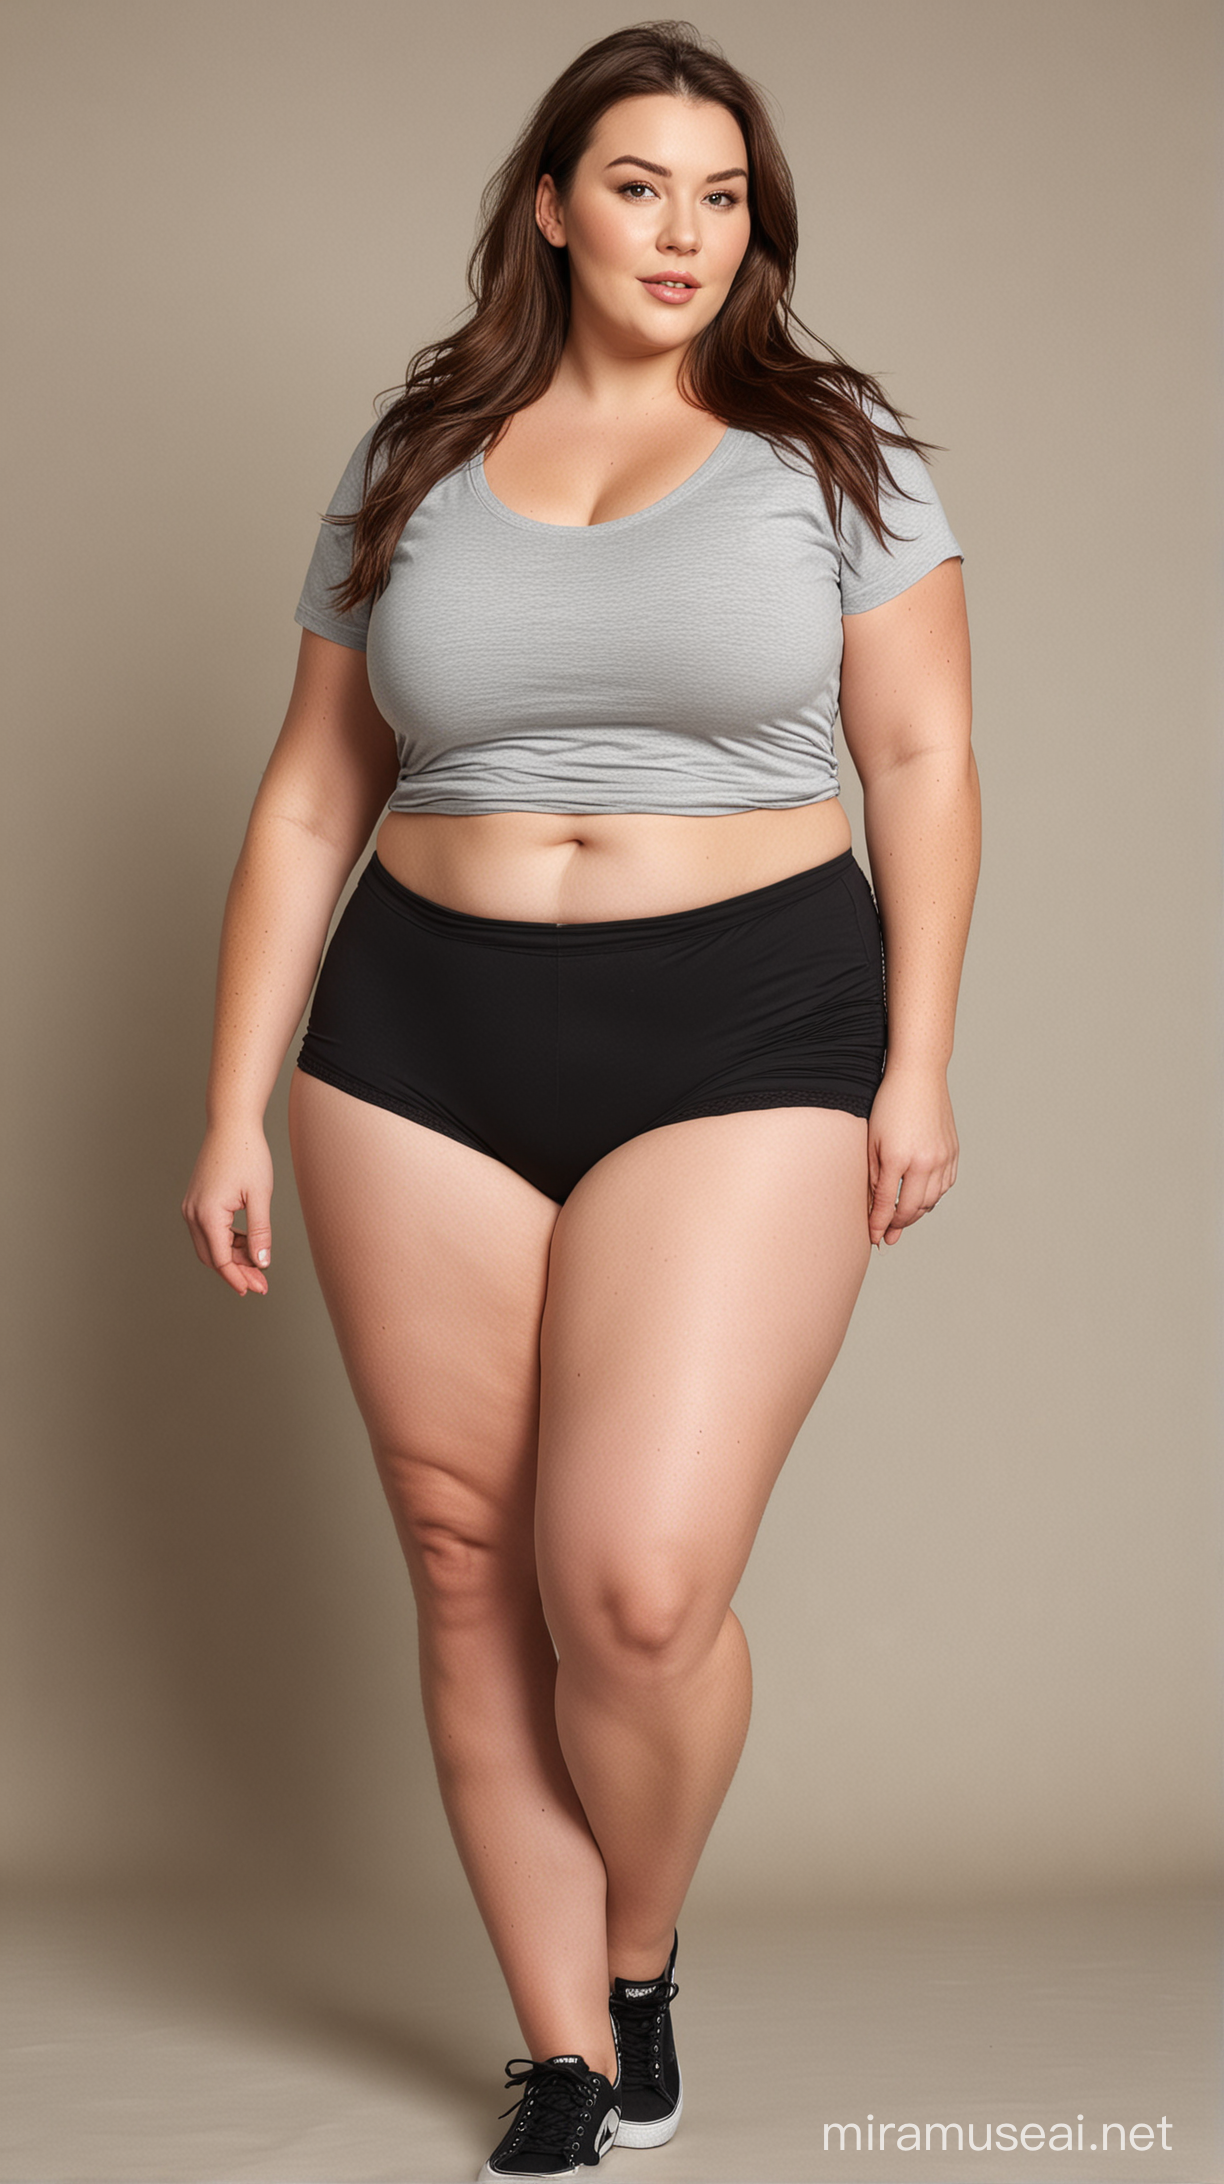 A plus size woman, 30 years old, weight 210 lbs, height 5.11 inch, wide hips, t shirt short